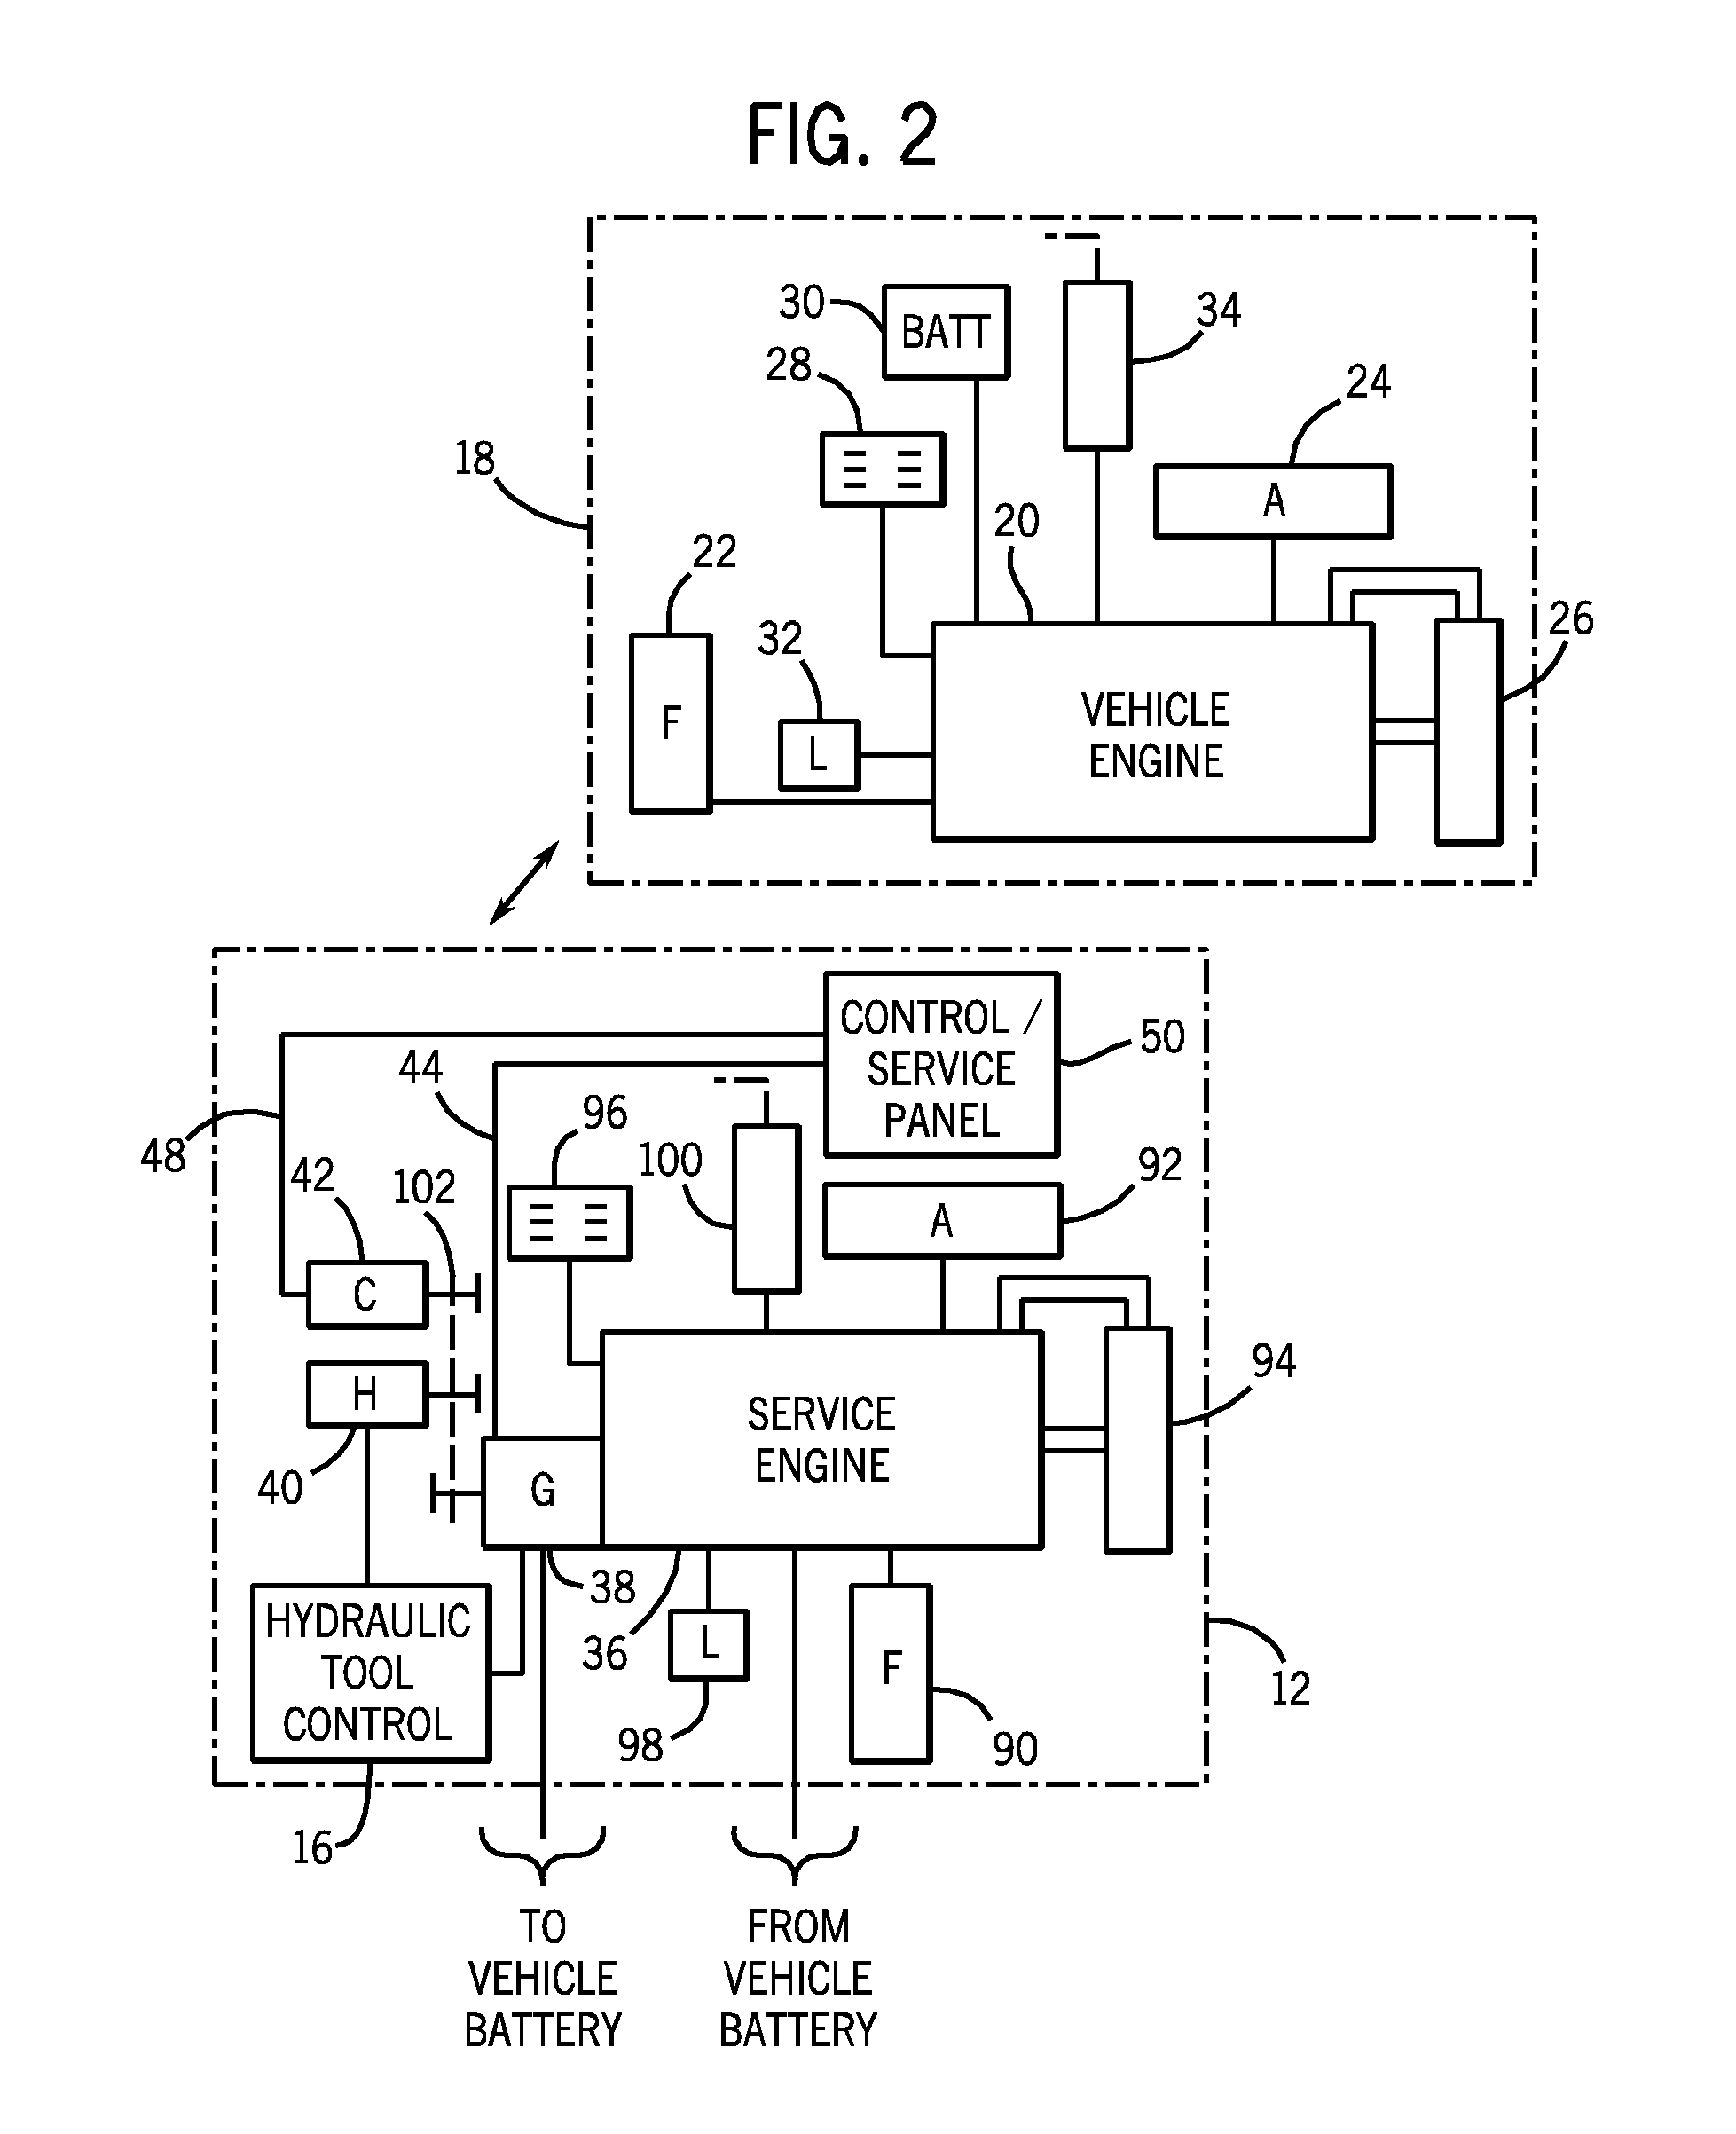 Hydraulic tool control with electronically adjustable flow